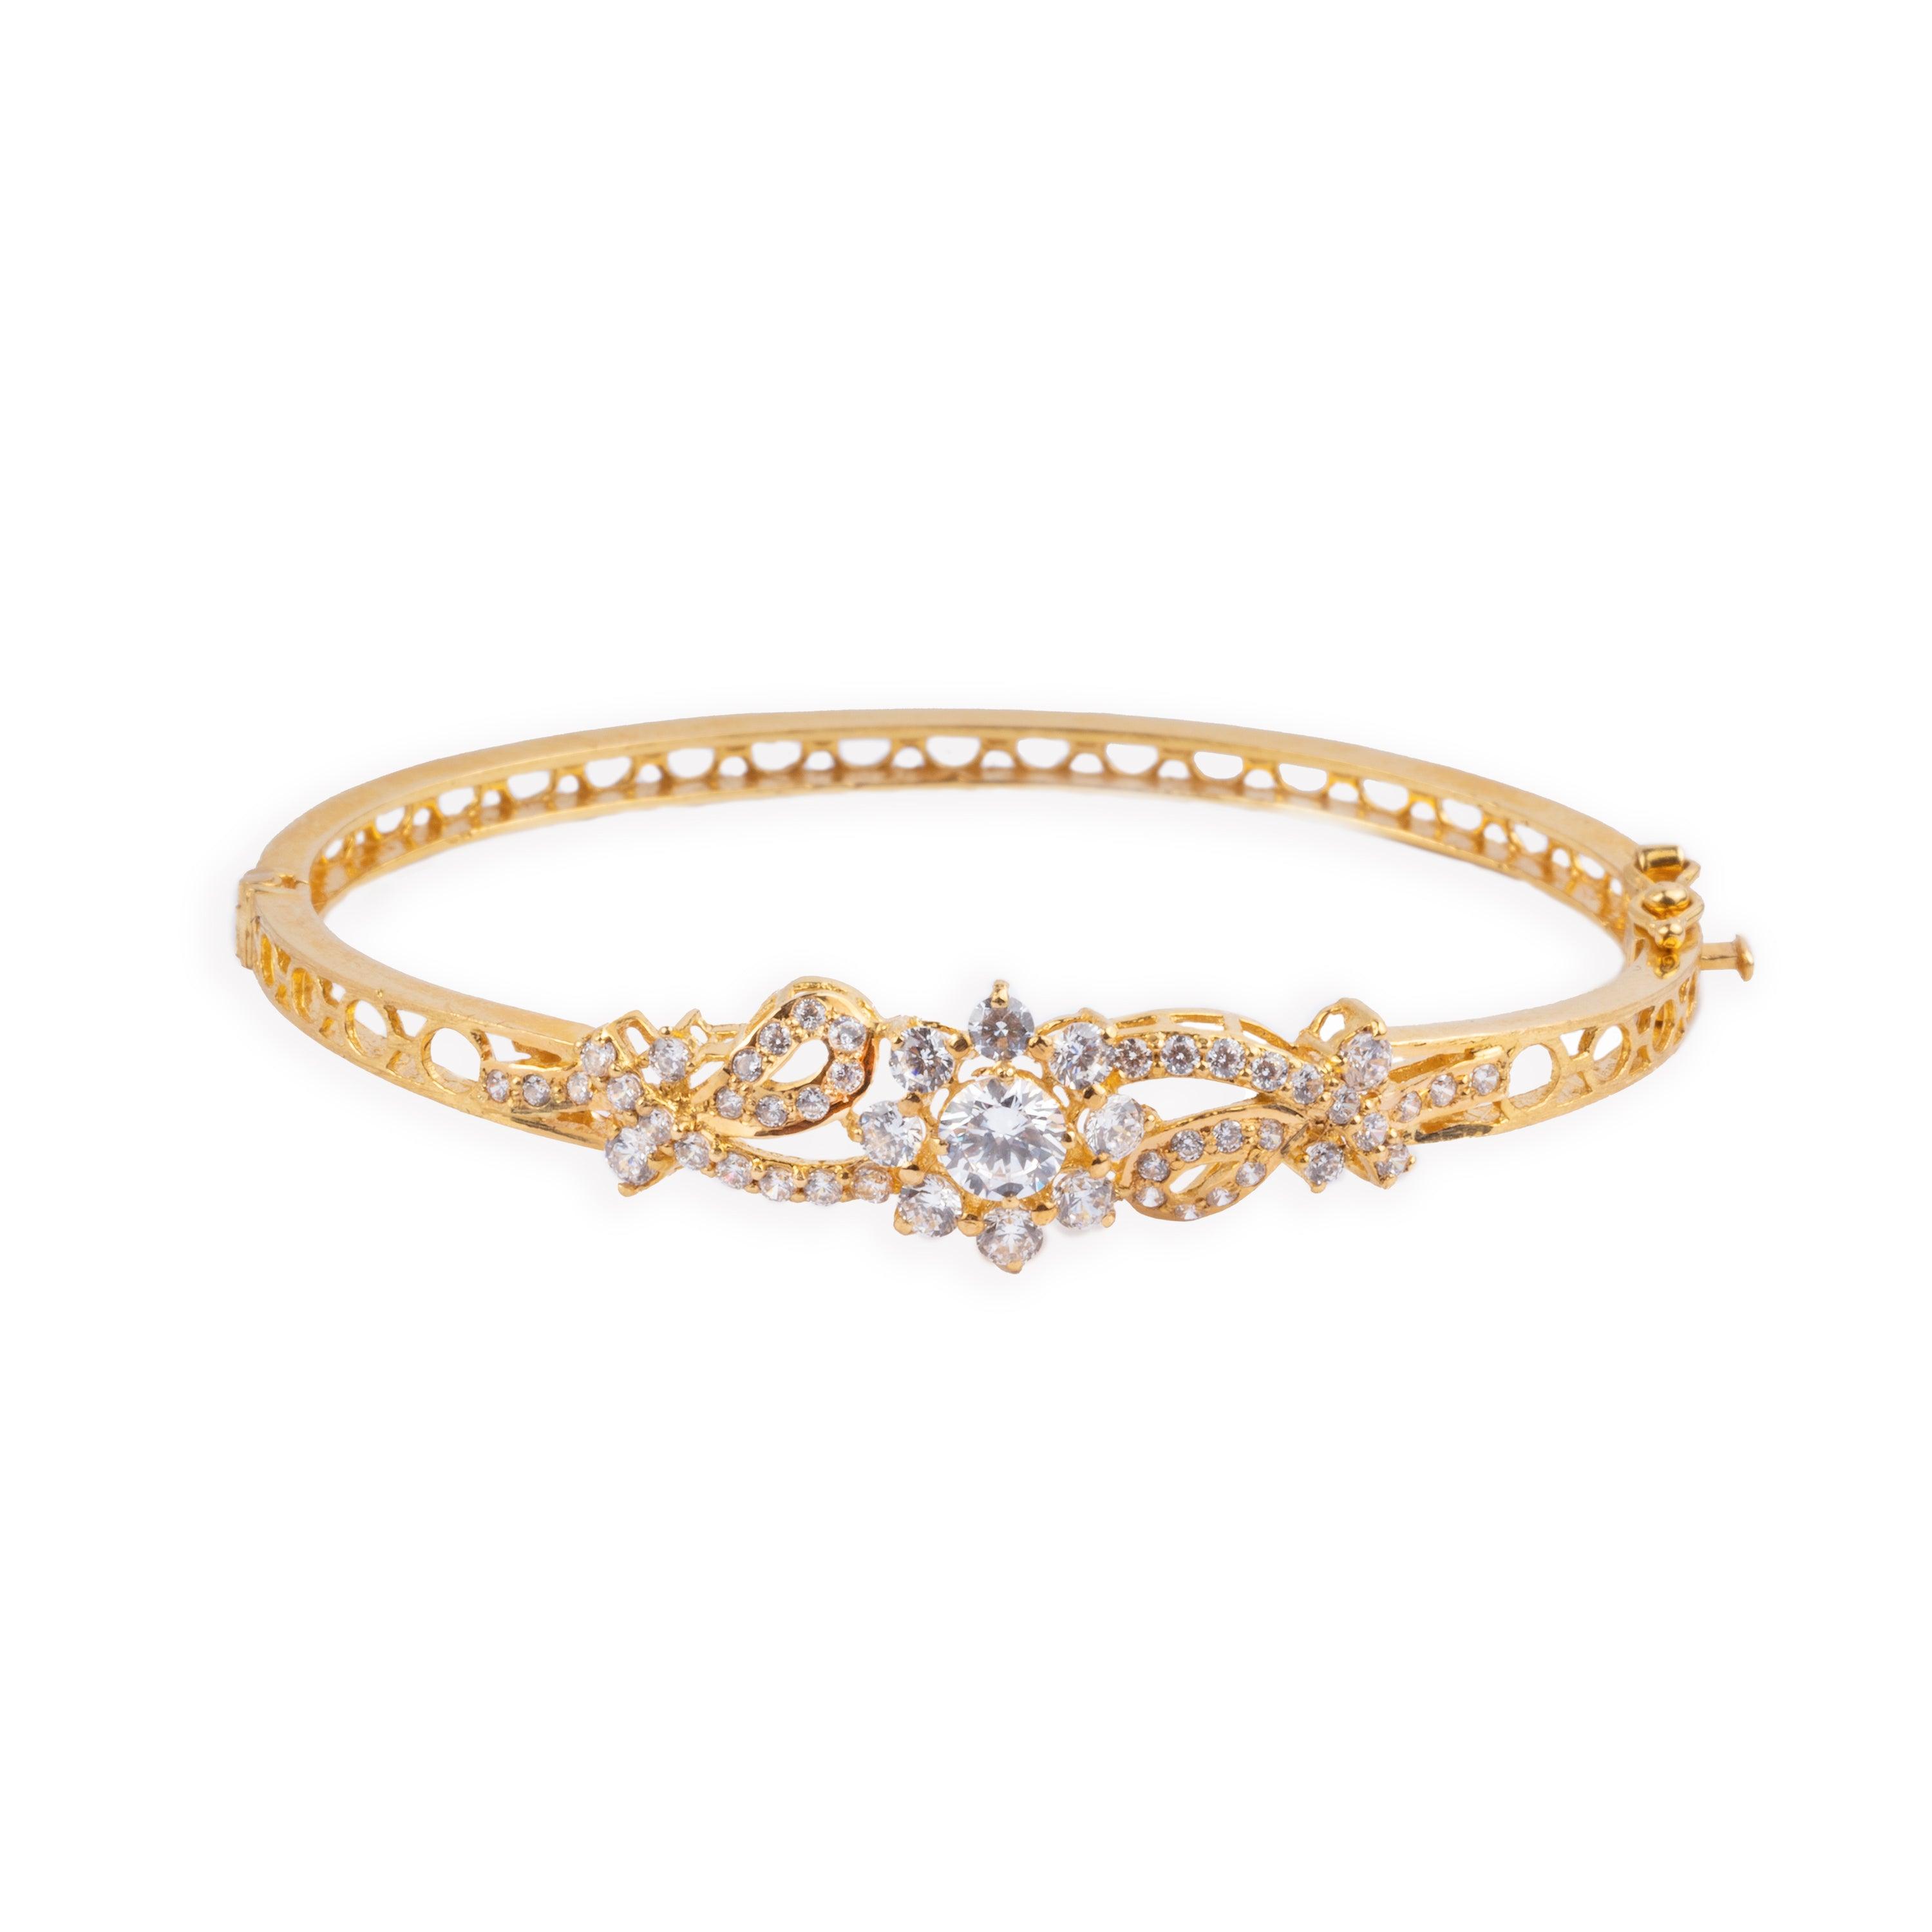 22ct Gold Openable Bangle set with Cubic Zirconias B-8086 - Minar Jewellers